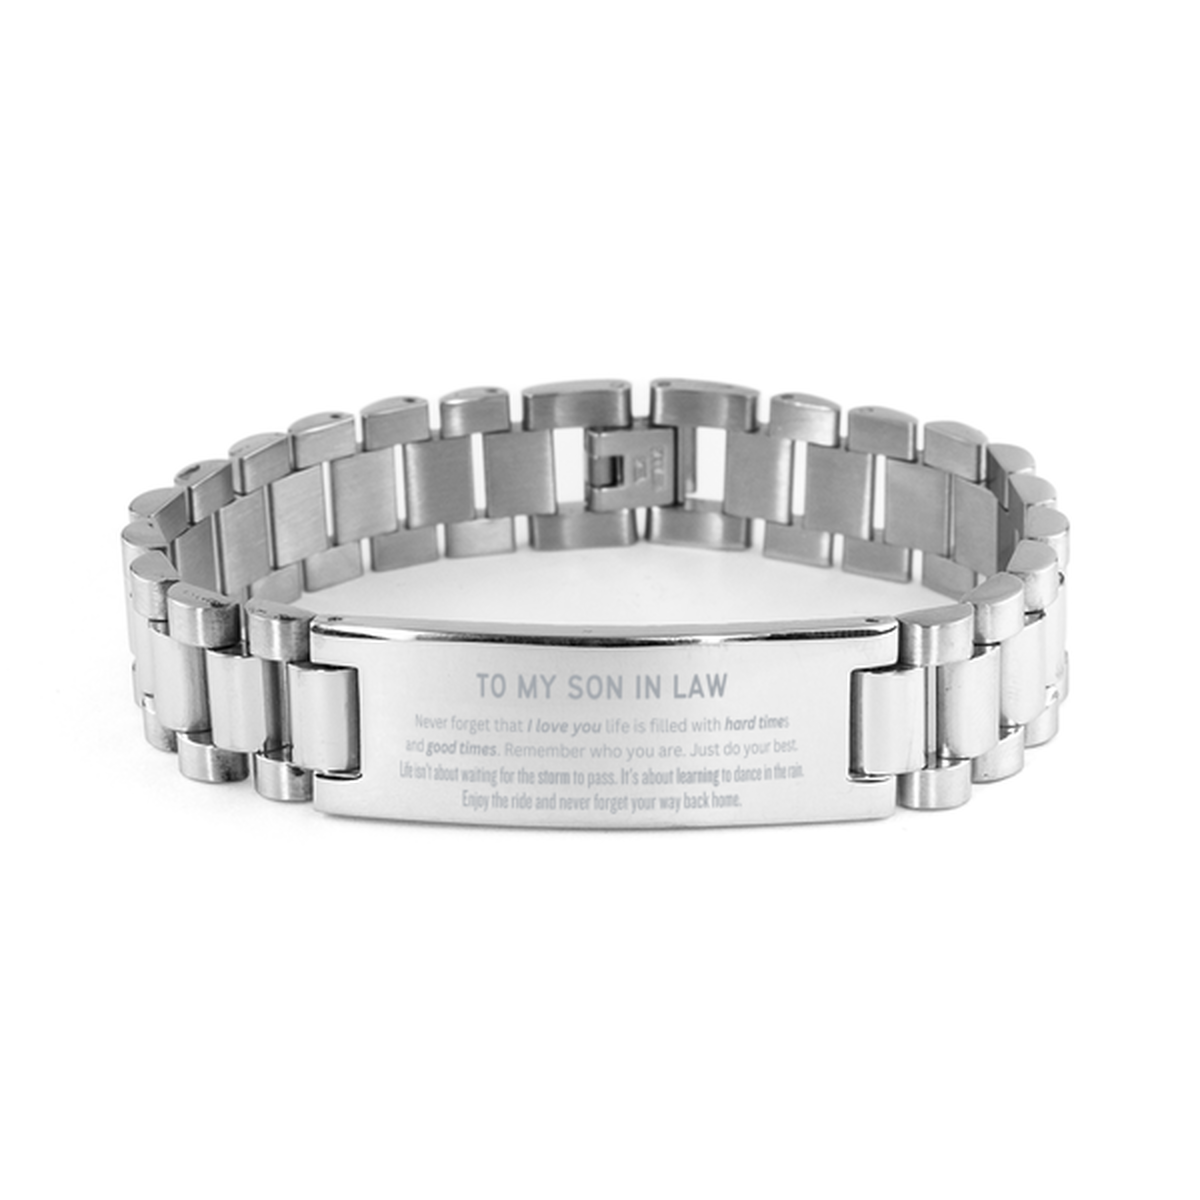 Christmas Son In Law Ladder Stainless Steel Bracelet Gifts, To My Son In Law Birthday Thank You Gifts For Son In Law, Graduation Unique Gifts For Son In Law To My Son In Law Never forget that I love you life is filled with hard times and good times. Remem